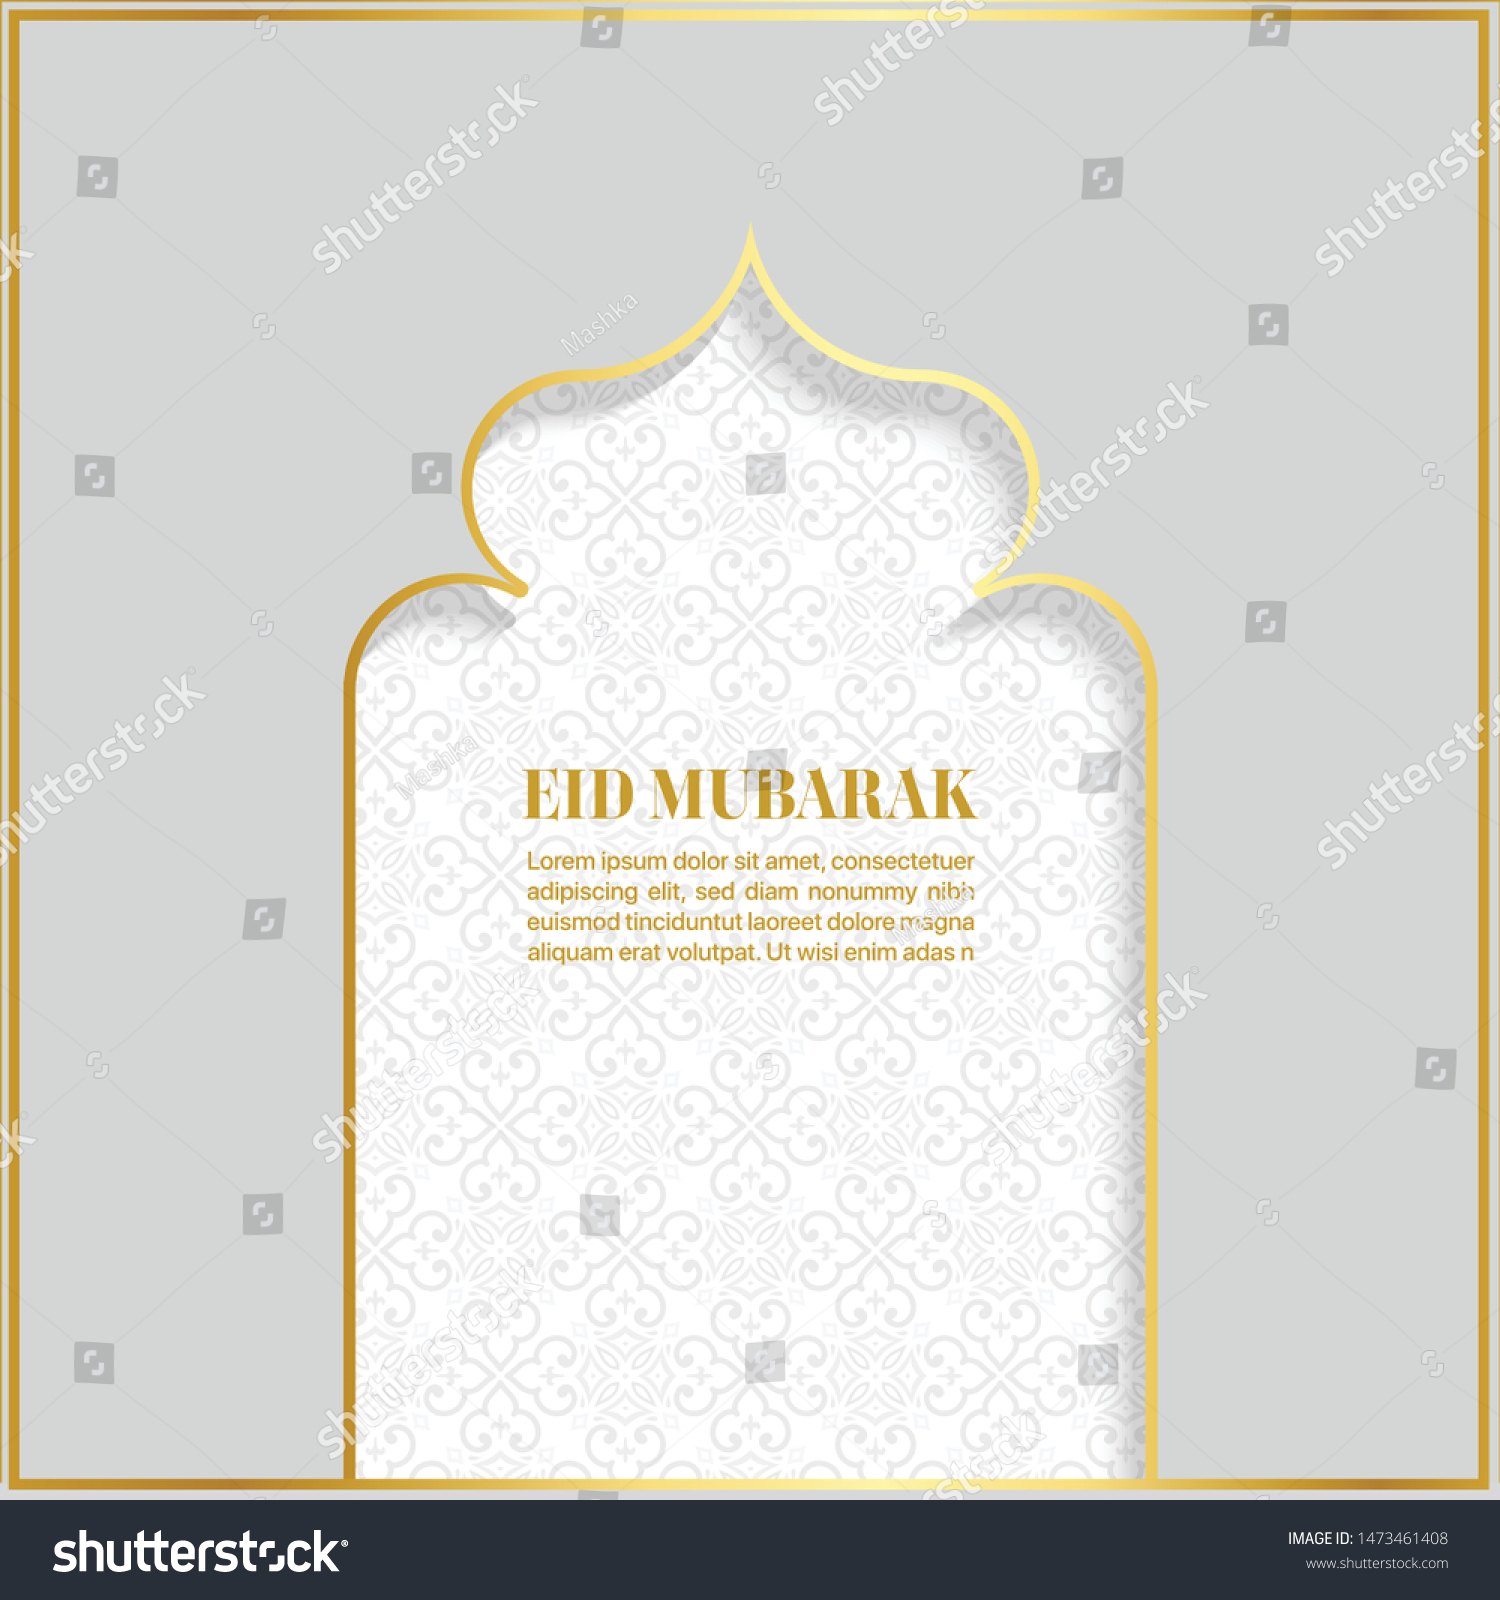 Illustration Vector: Eid Mubarak with glowing golden frame and moroccan pattern for background.  #1473461408